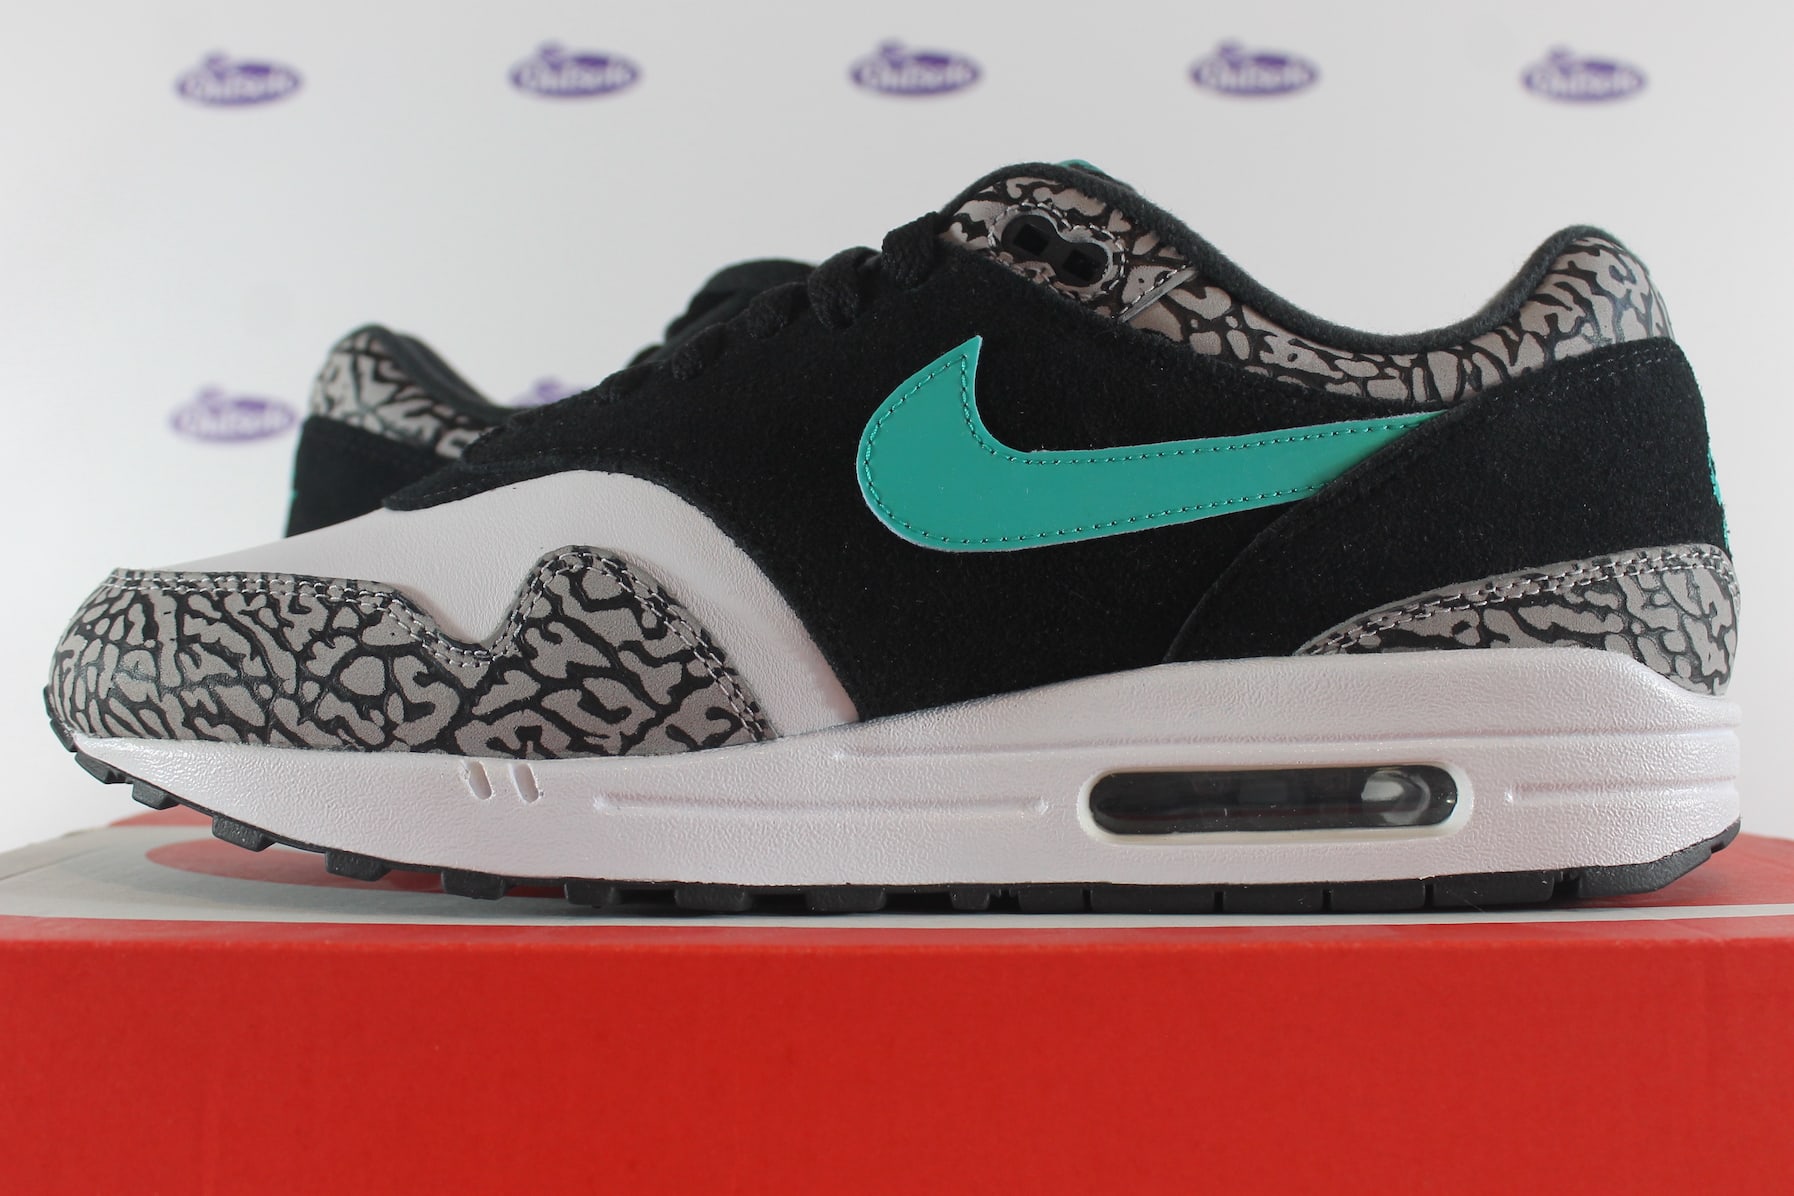 Nike Air Max Premium Atmos Elephant Retro • ✓ In stock at Outsole